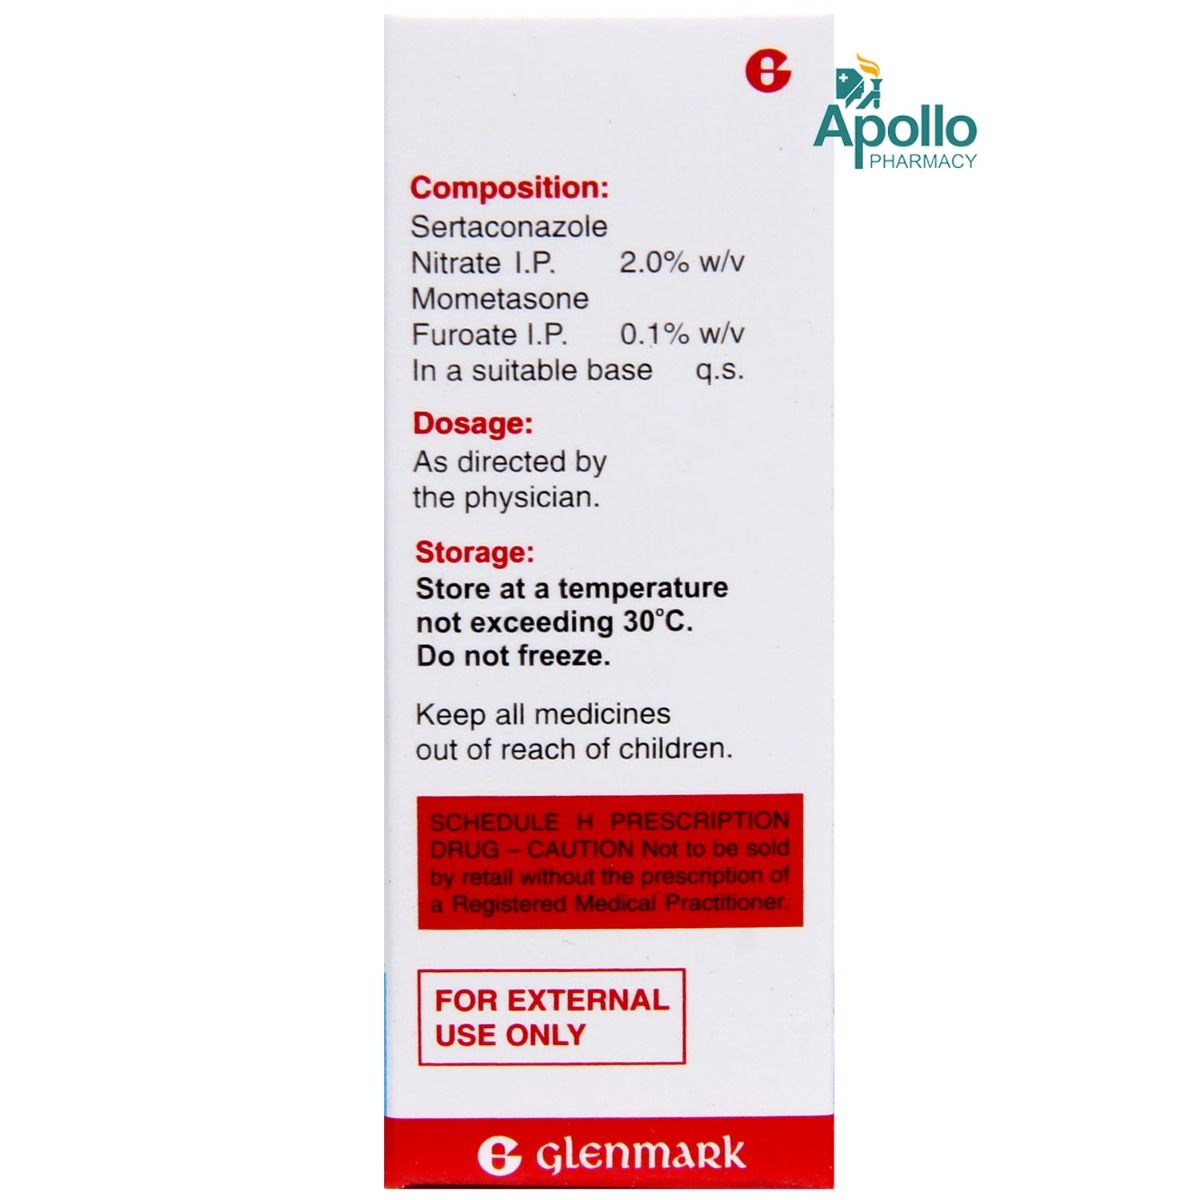 Onabet SD Solution 15 ml Price, Uses, Side Effects, Composition - Apollo  Pharmacy